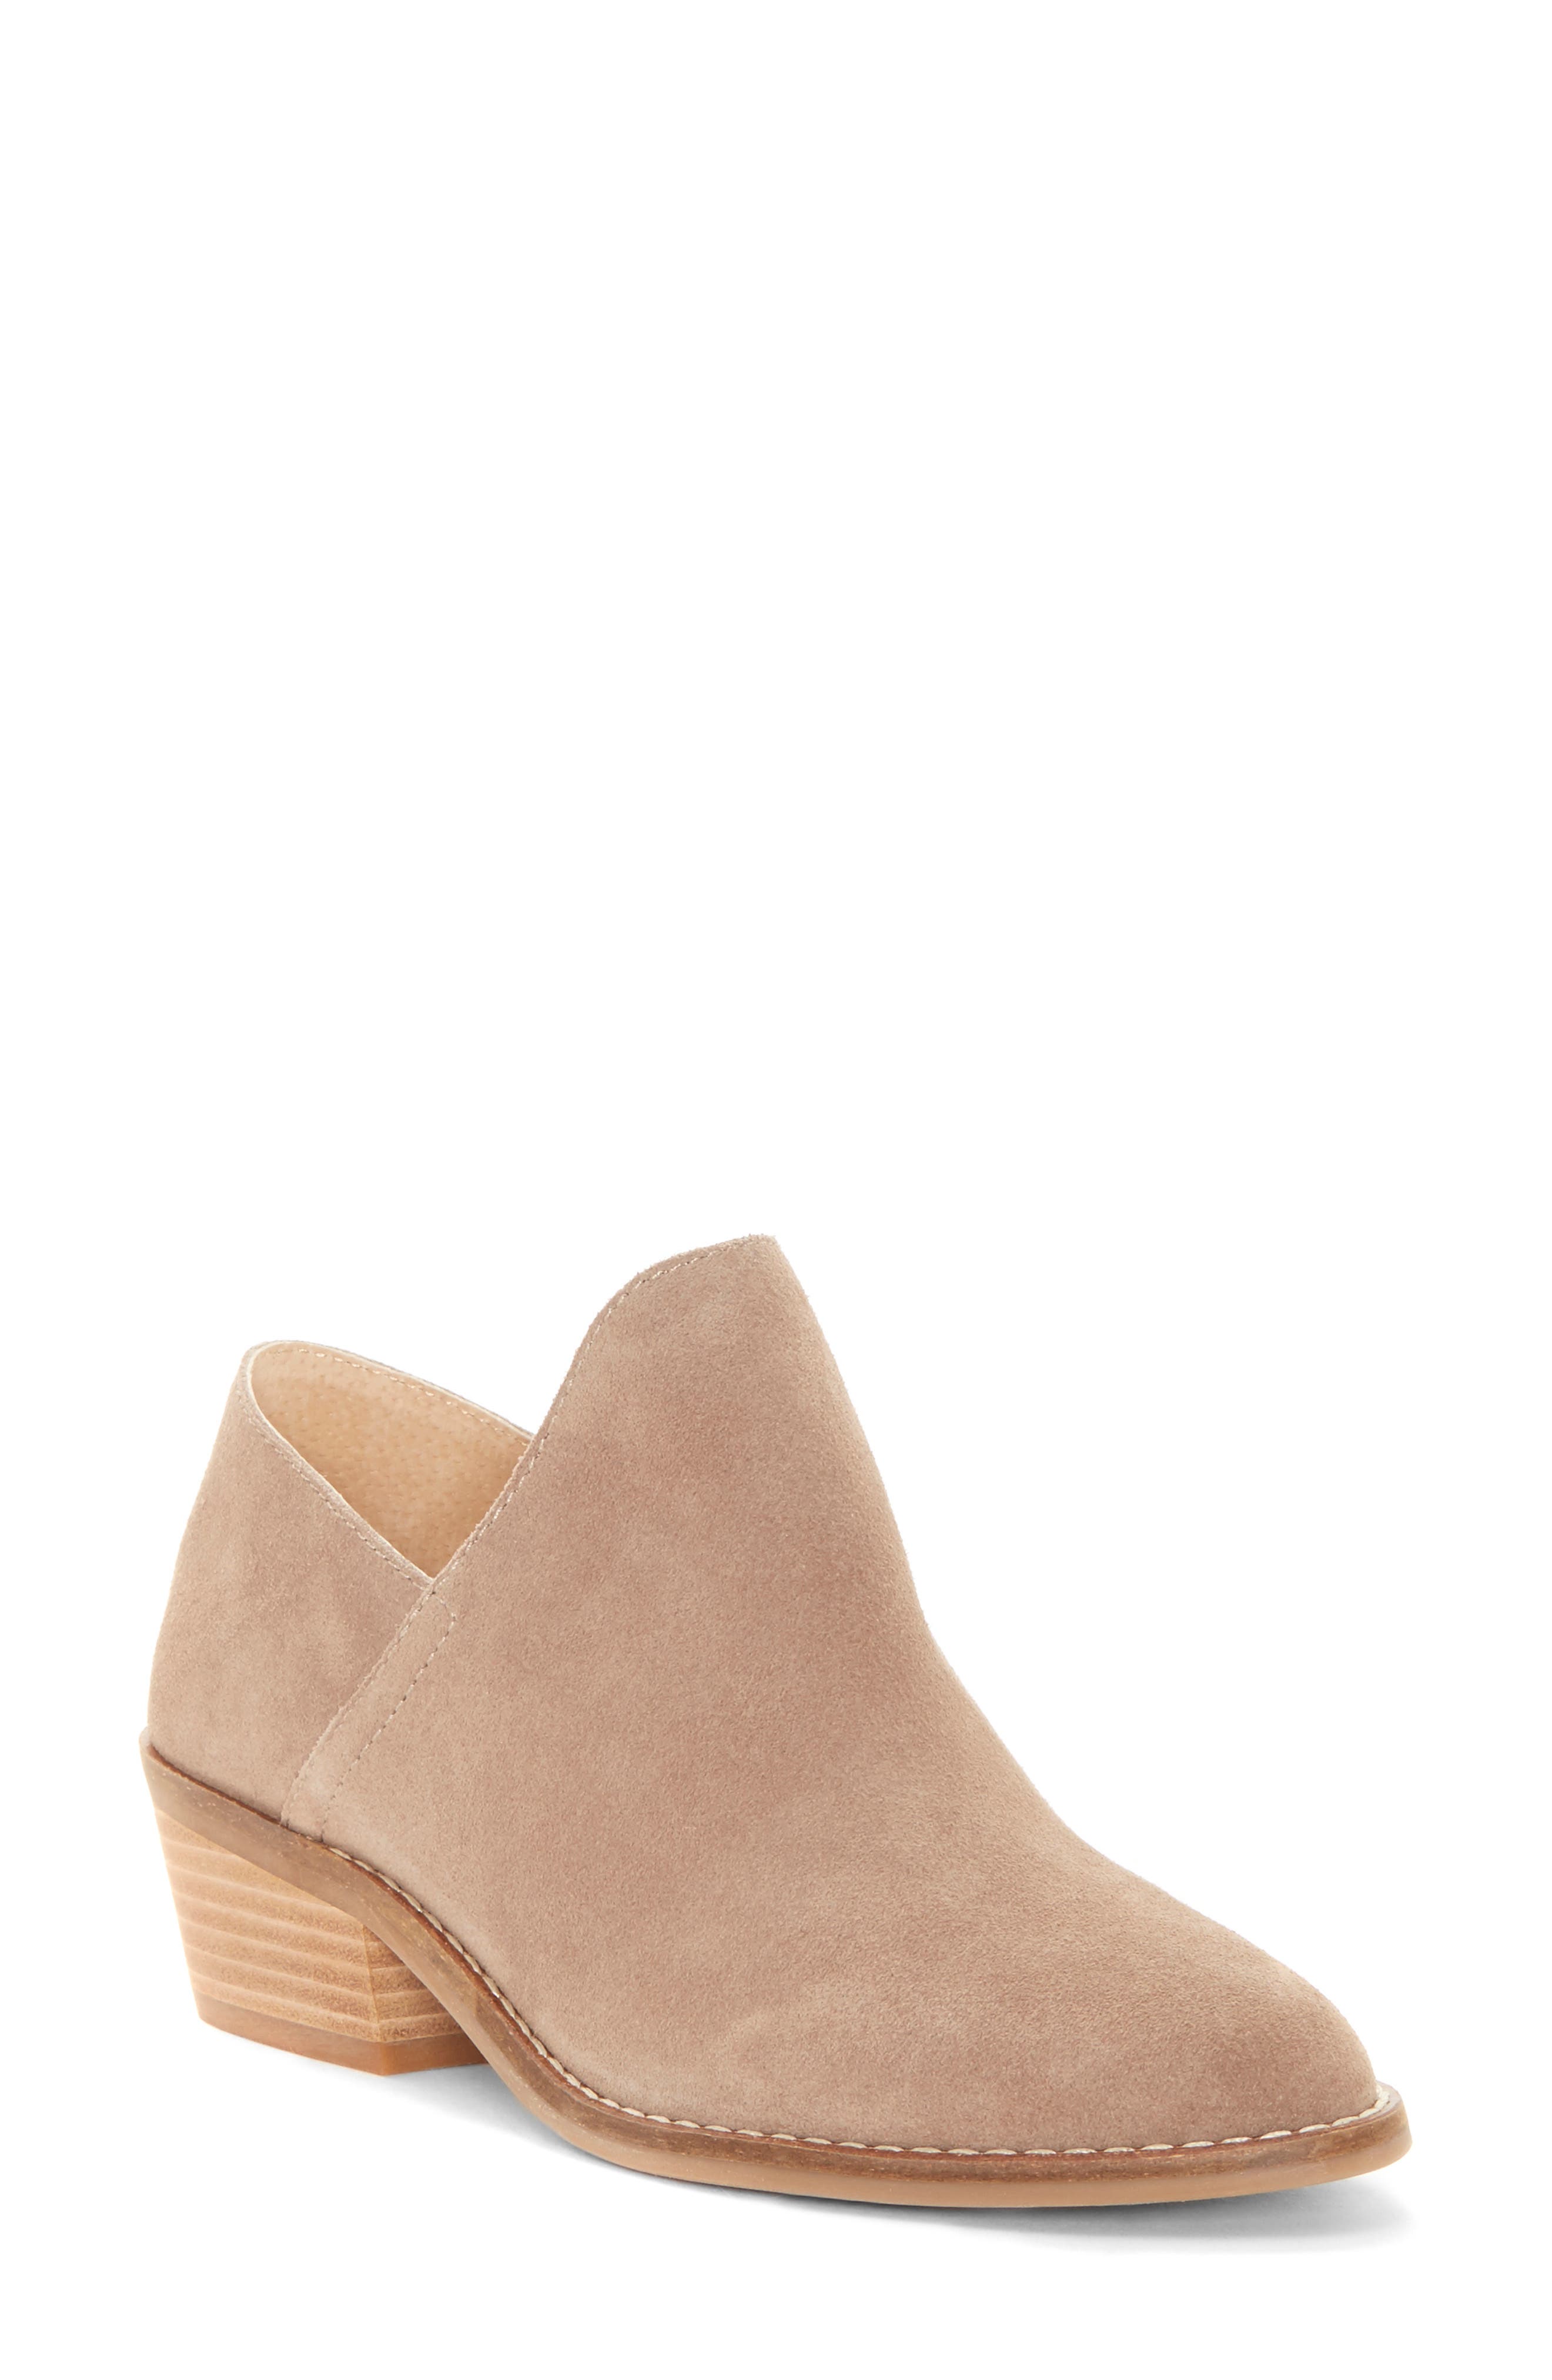 lucky brand ankle boots nordstrom rack